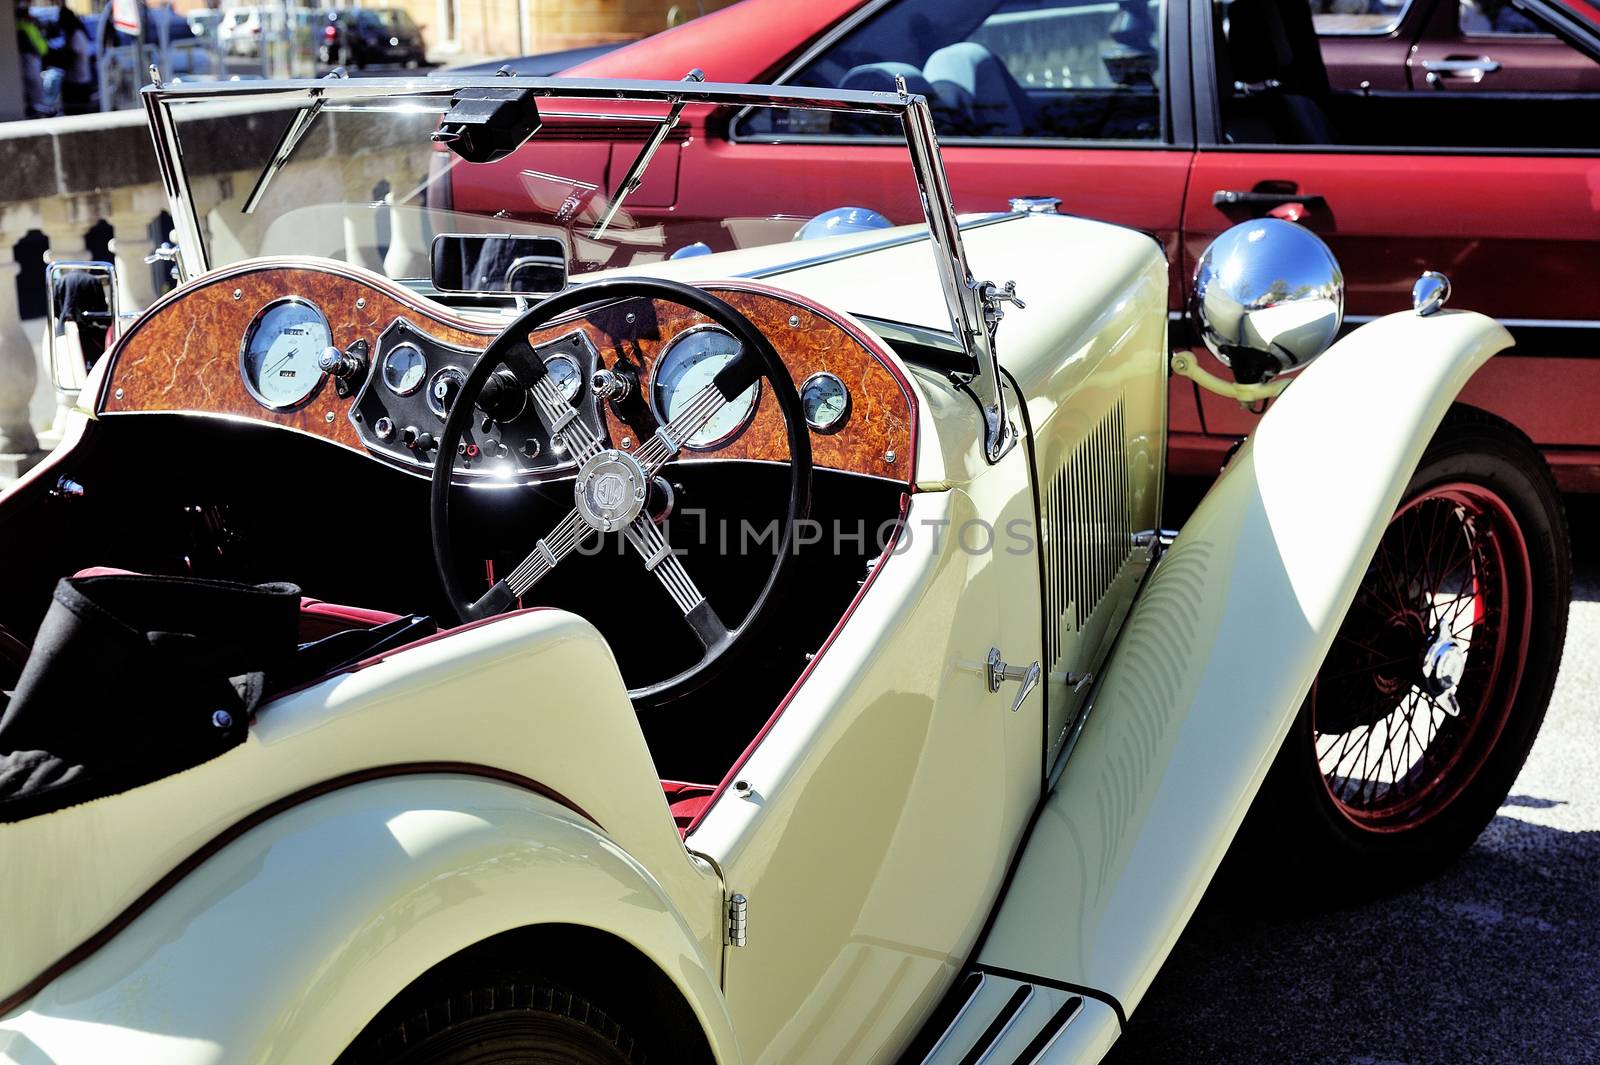 MG sports car in 1953 years by gillespaire